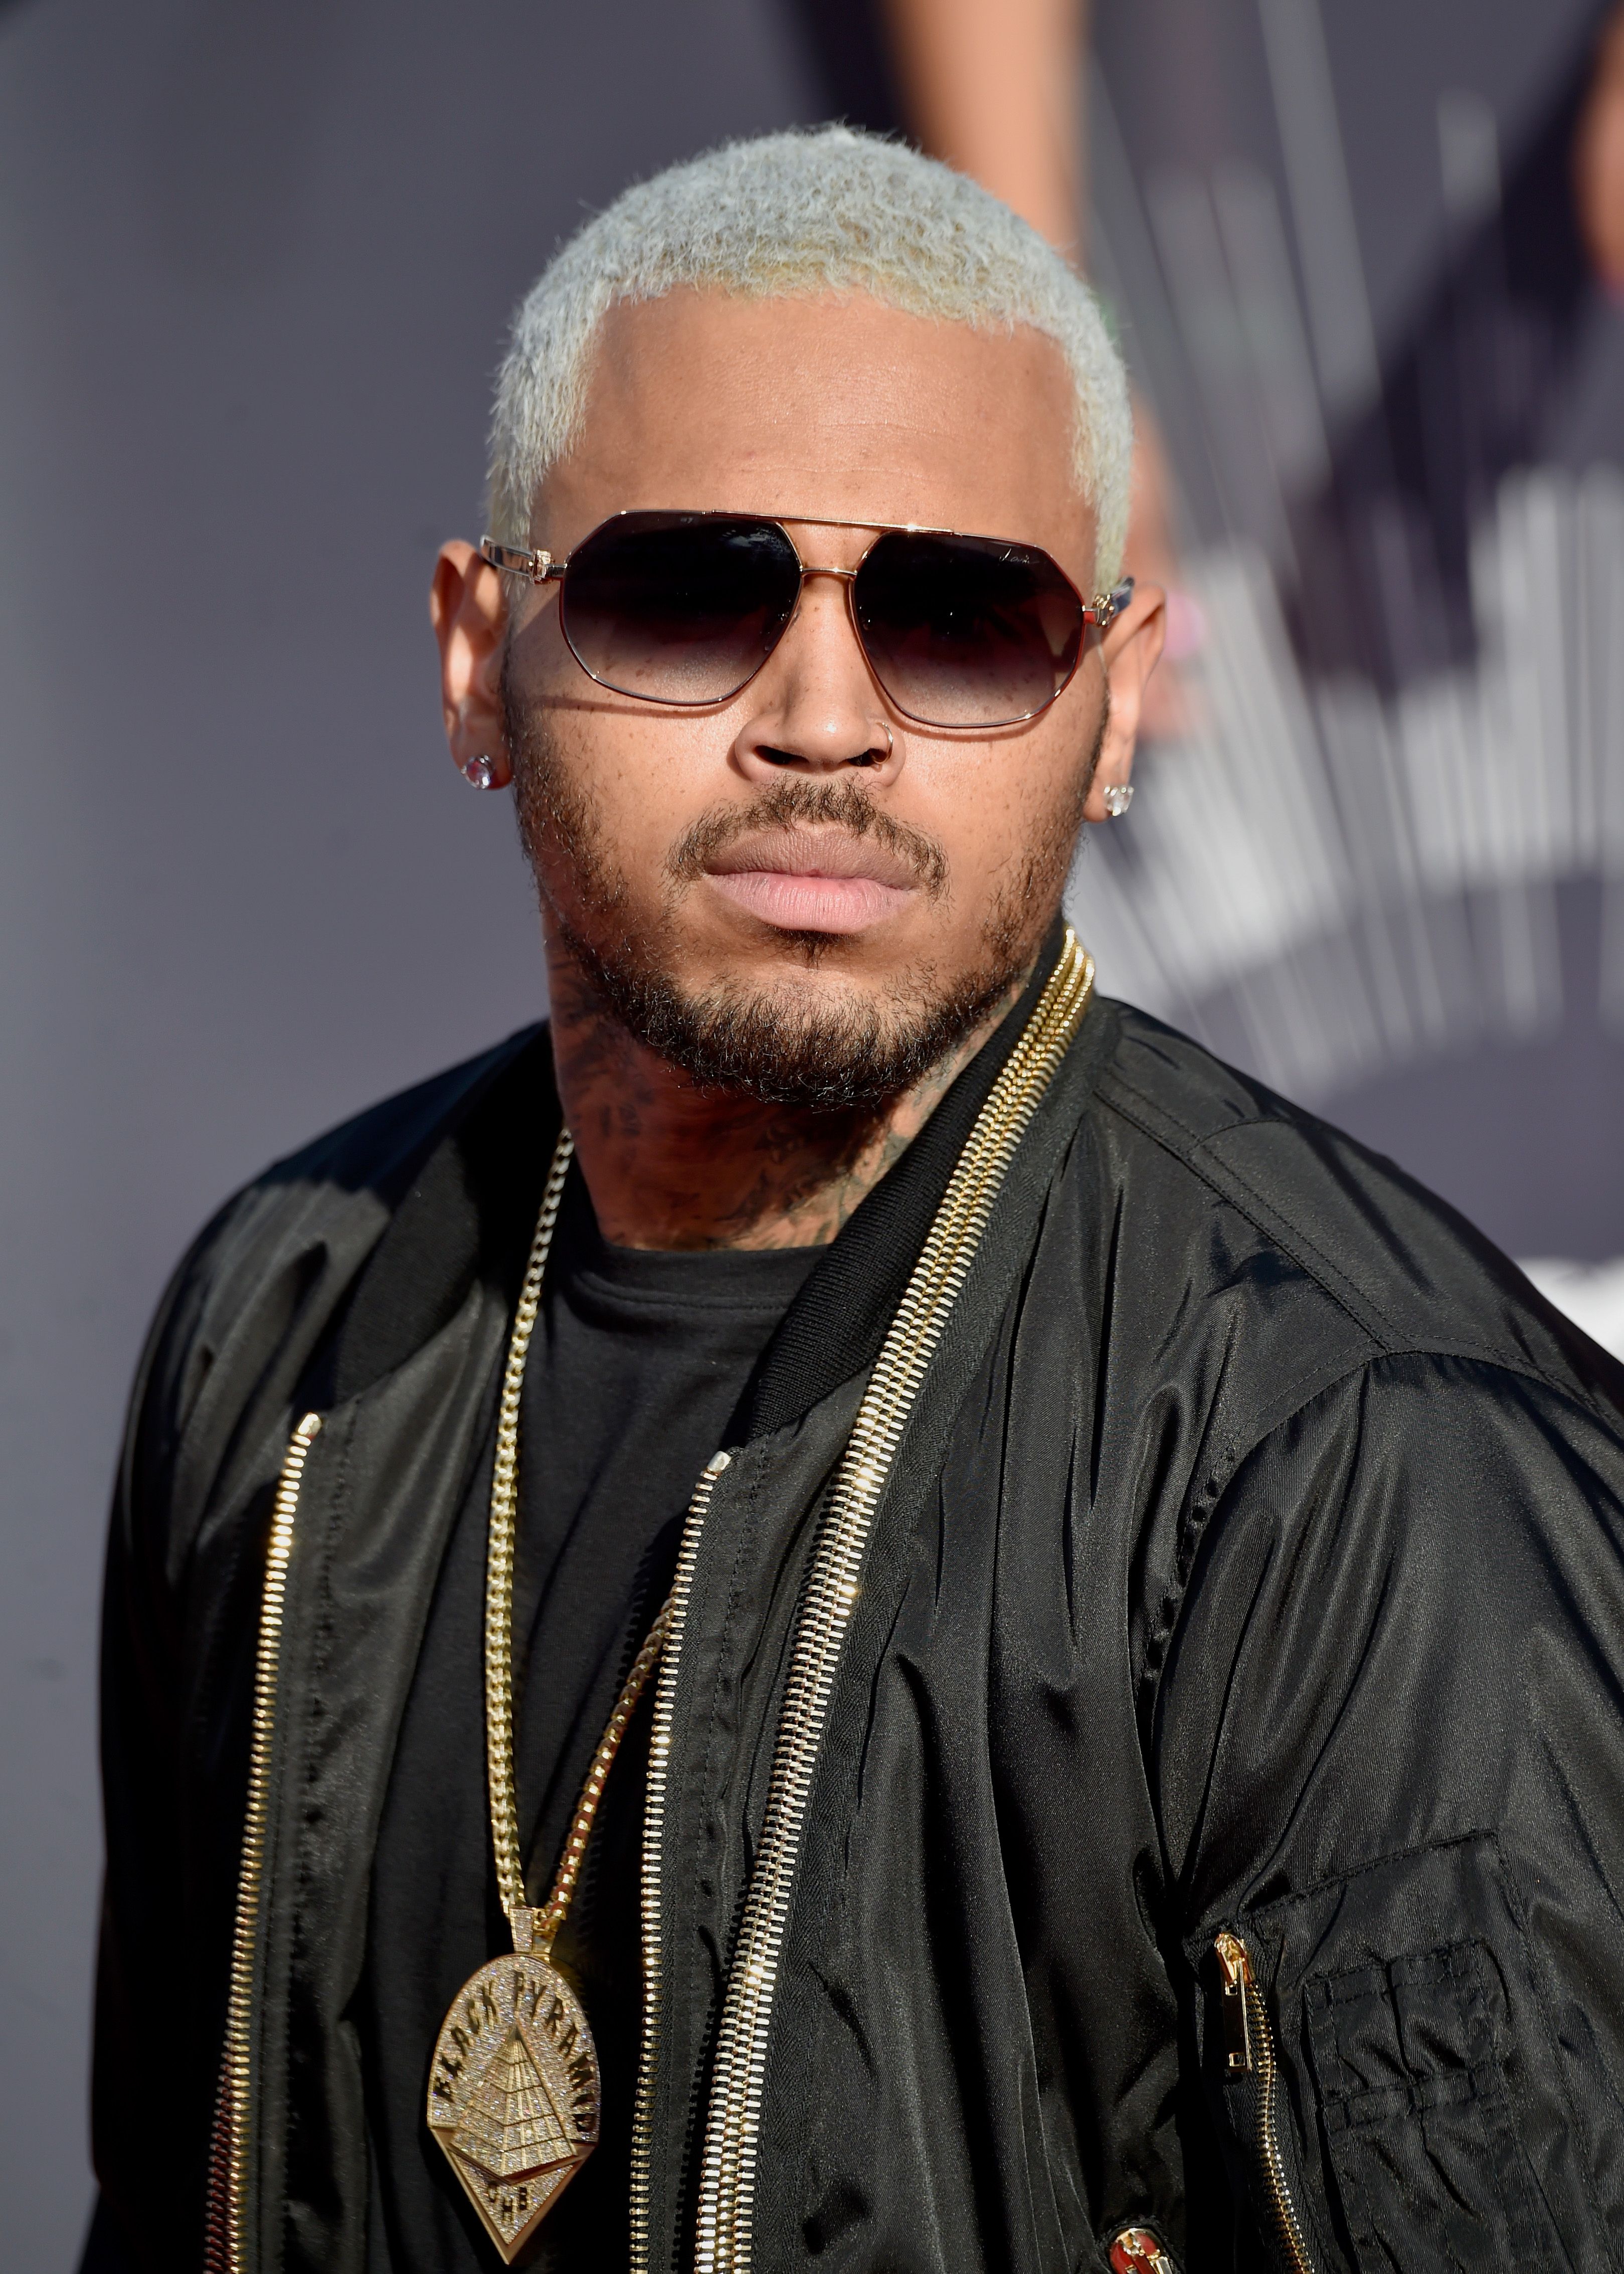 Chris Brown Accepts Plea Deal in D.C. Assault Case for a Really